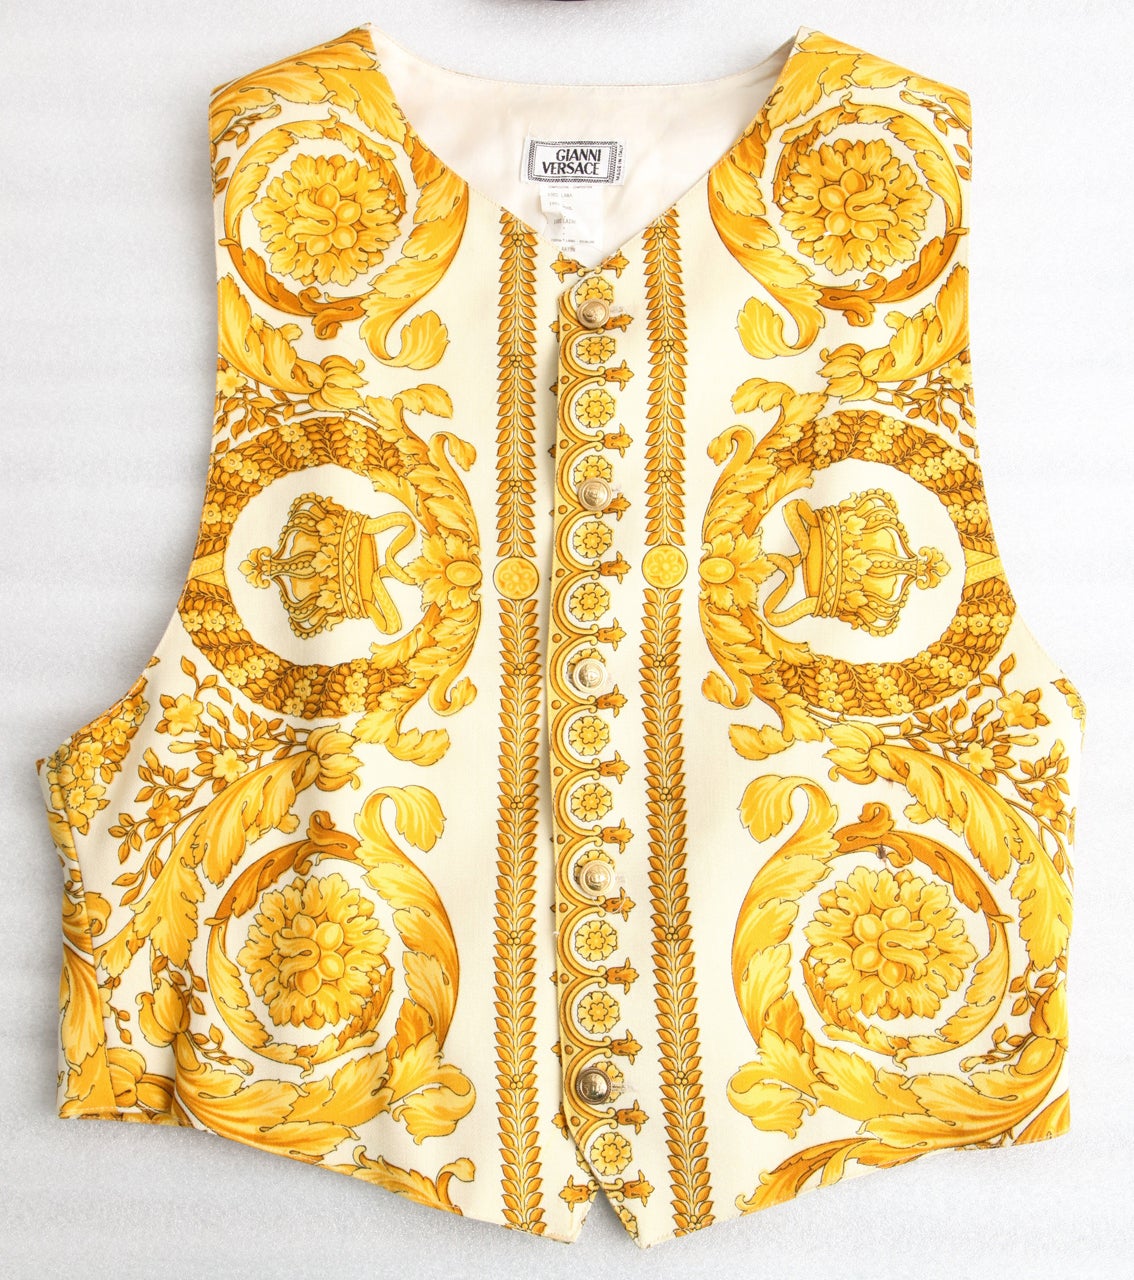 Extremely rare Gianni Versace Men's Vest in Baroque Print with iconic Medusa buttons.

Armpit to armpit 18 inches
Length 19 inches